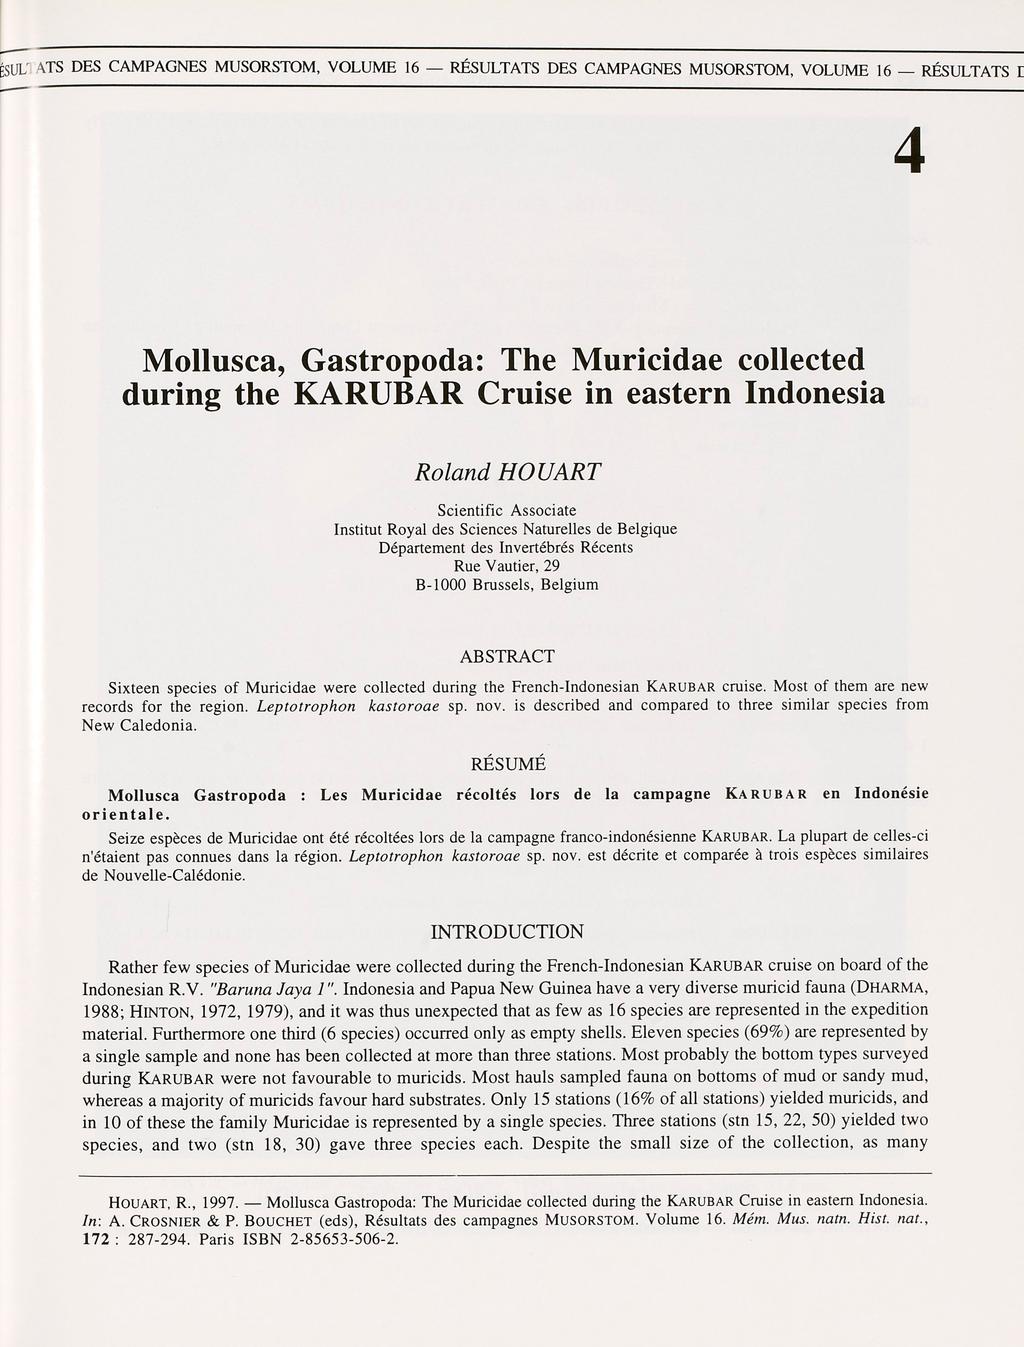 ÉSUL' ATS DES CAMPAGNES MUSORSTOM, VOLUME 16 RÉSULTATS DES CAMPAGNES MUSORSTOM, VOLUME 16 RÉSULTATS E 4 Mollusca, Gastropoda: The Muricidae collected during the KARUBAR Cruise in eastern Indonesia